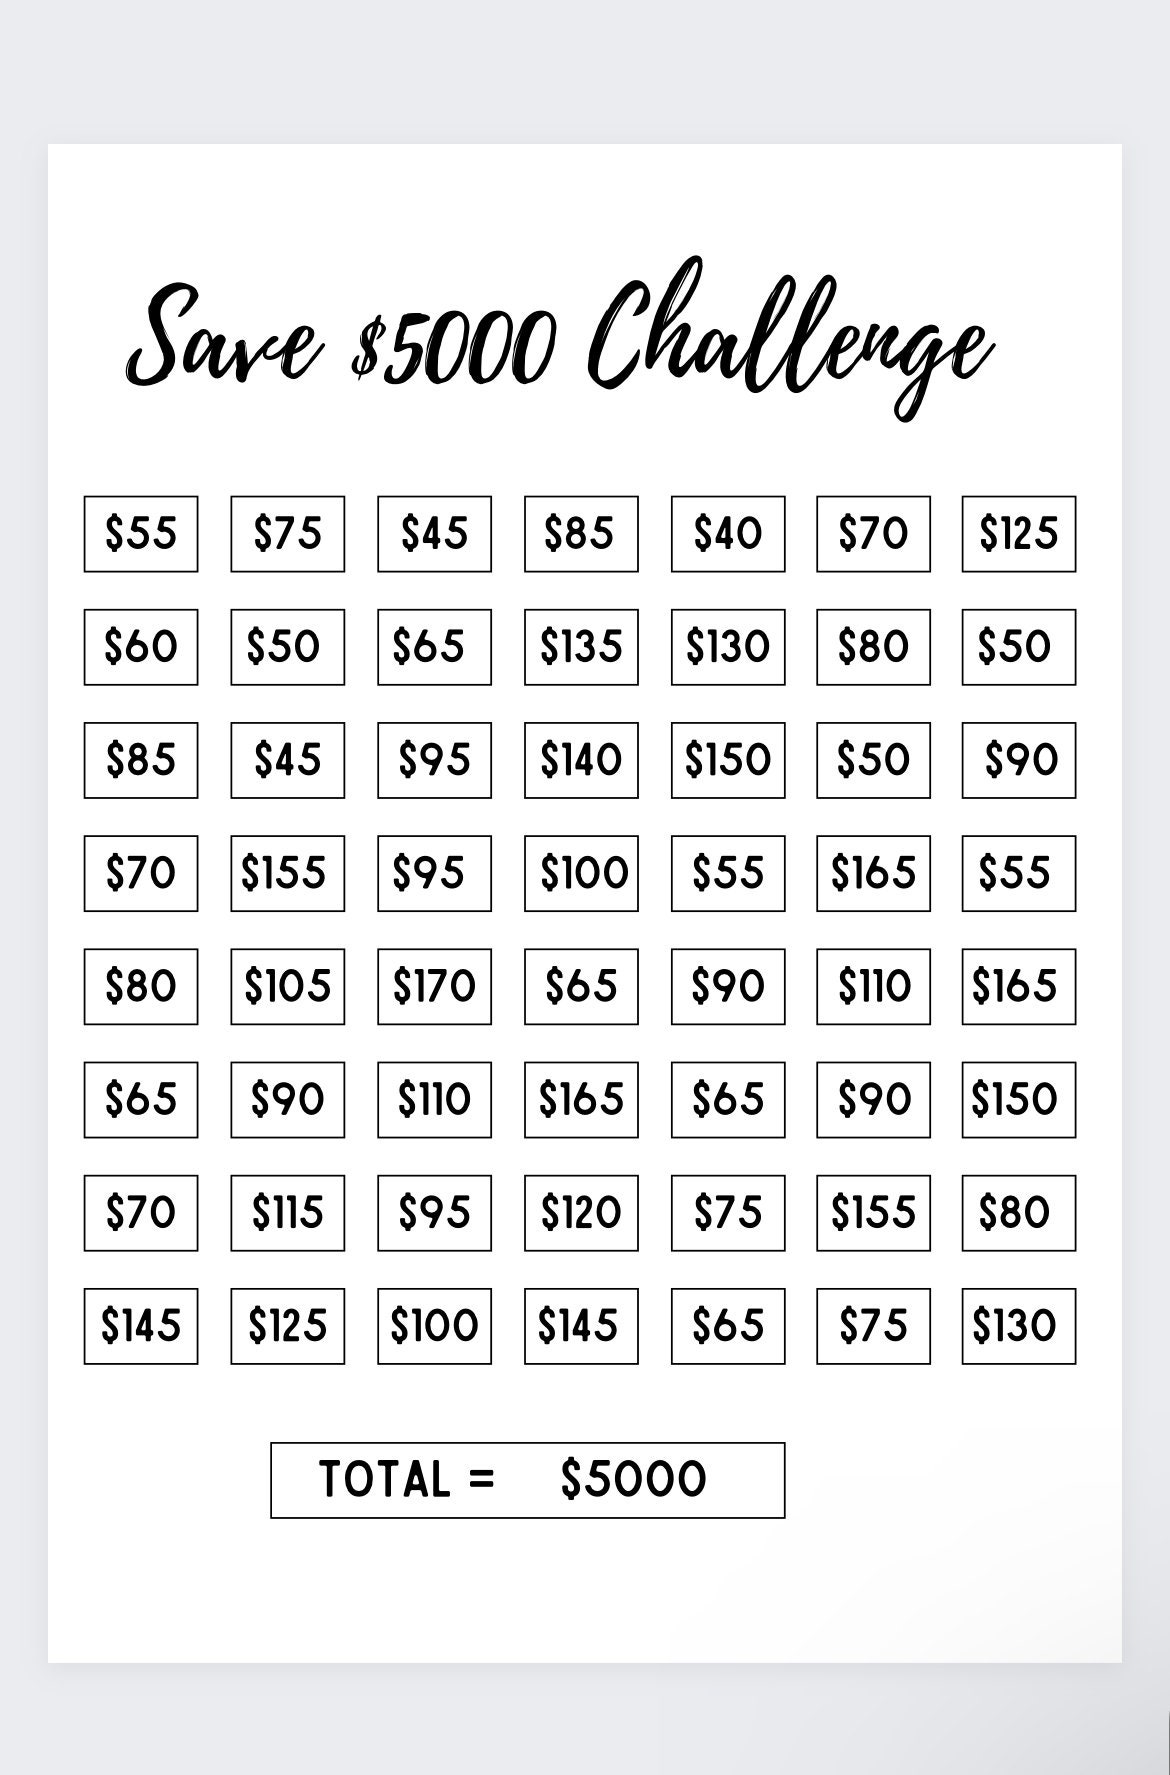 52-Week Money Challenge: How to Save $5,000 This Year